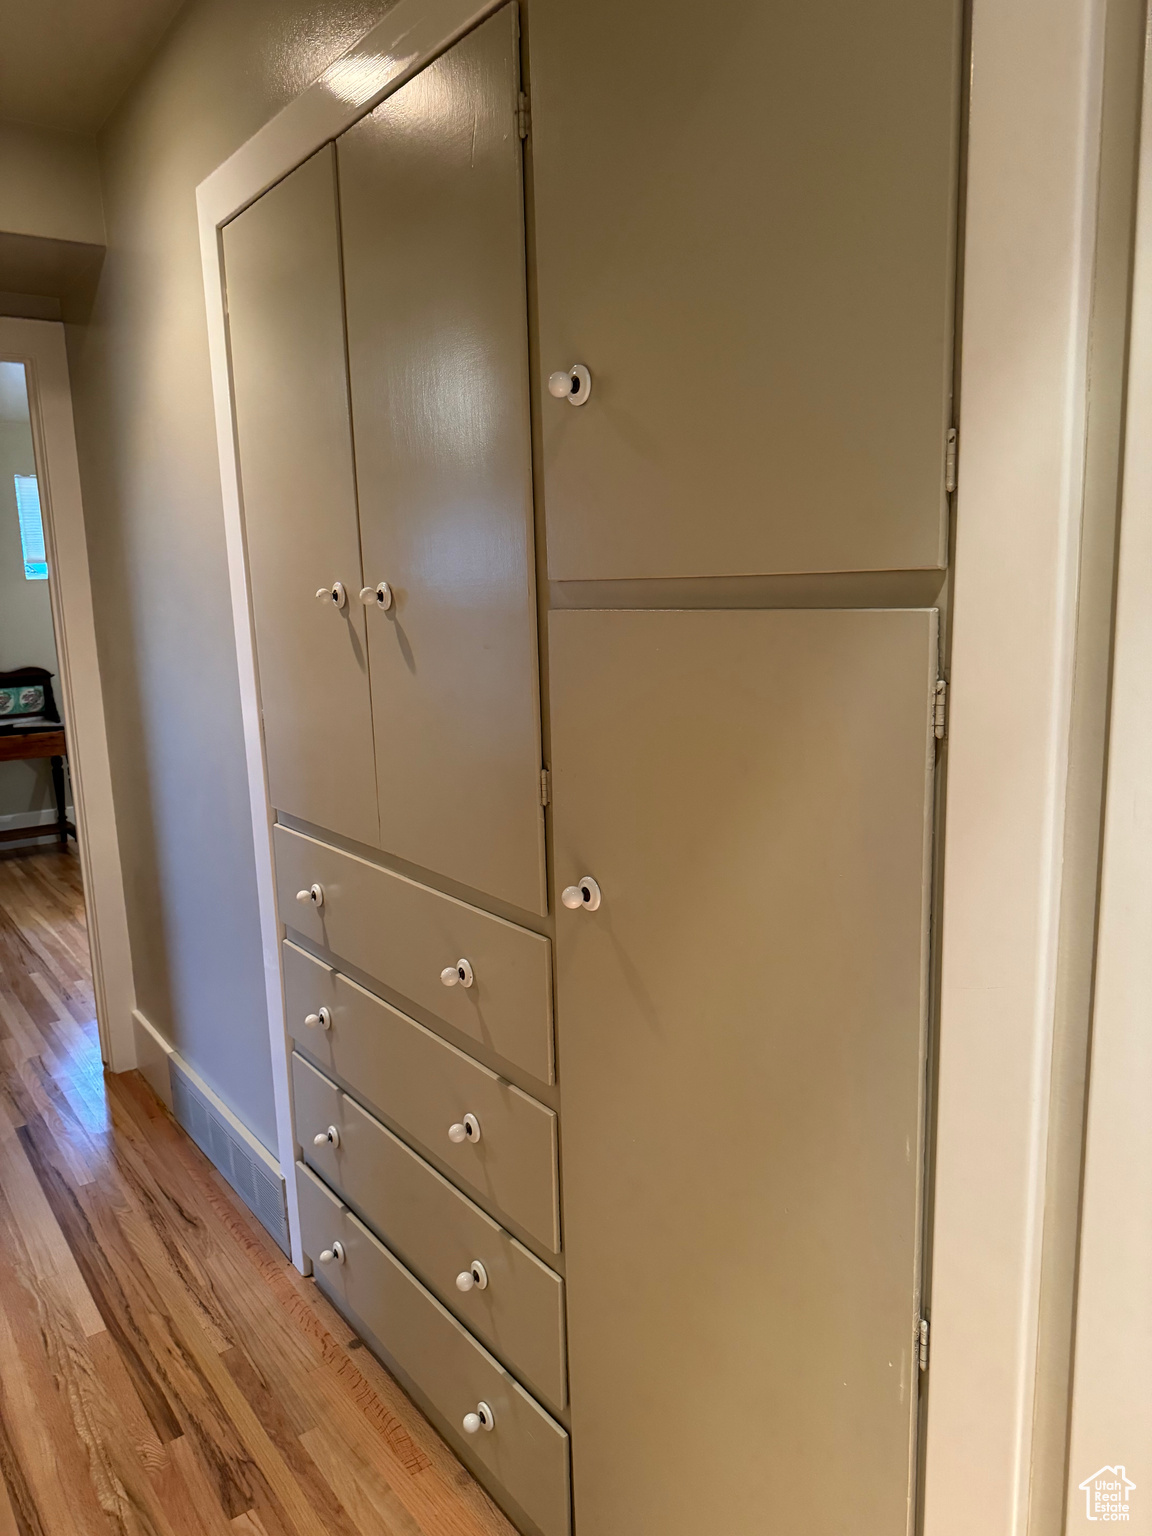 Built-in cabinets